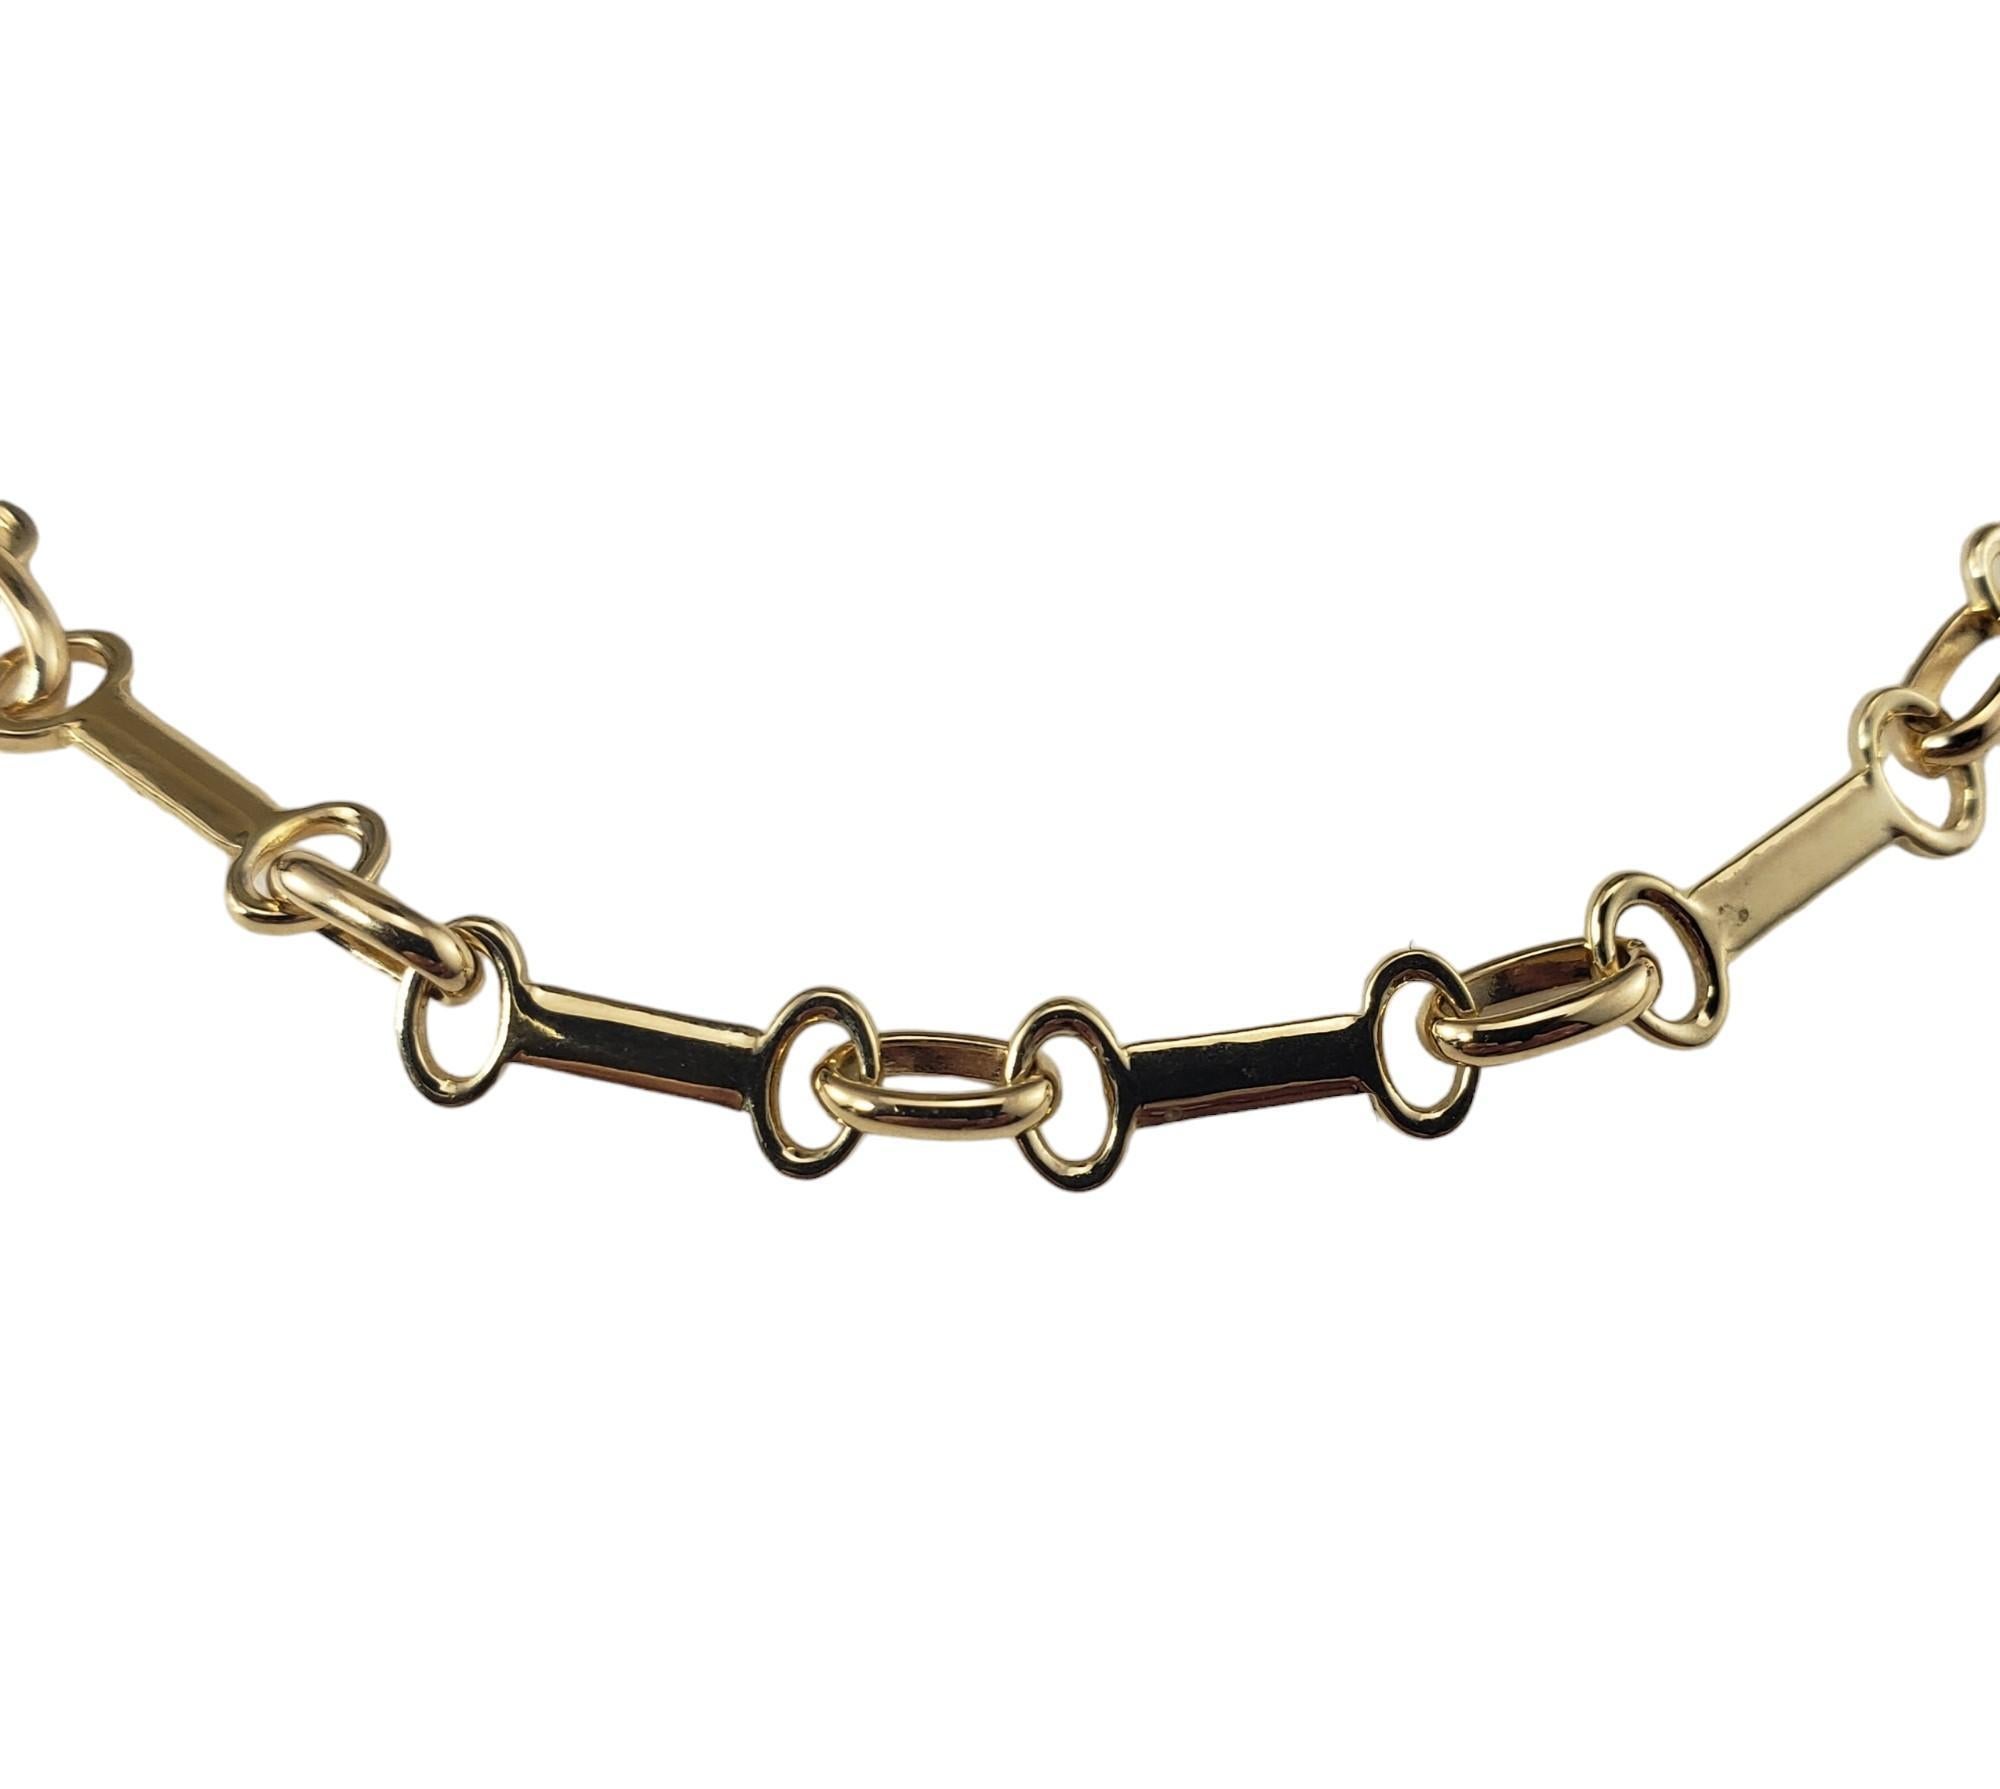 14 Karat Yellow Gold Link Bracelet-

This stunning link bracelet is crafted in meticulously detailed 14K yellow gold.  

Width: 4 mm.

Size: 7 inches

Stamped: 14K  Italy

Weight: 3.1 dwt./ 4.8 gr.

Very good condition, professionally